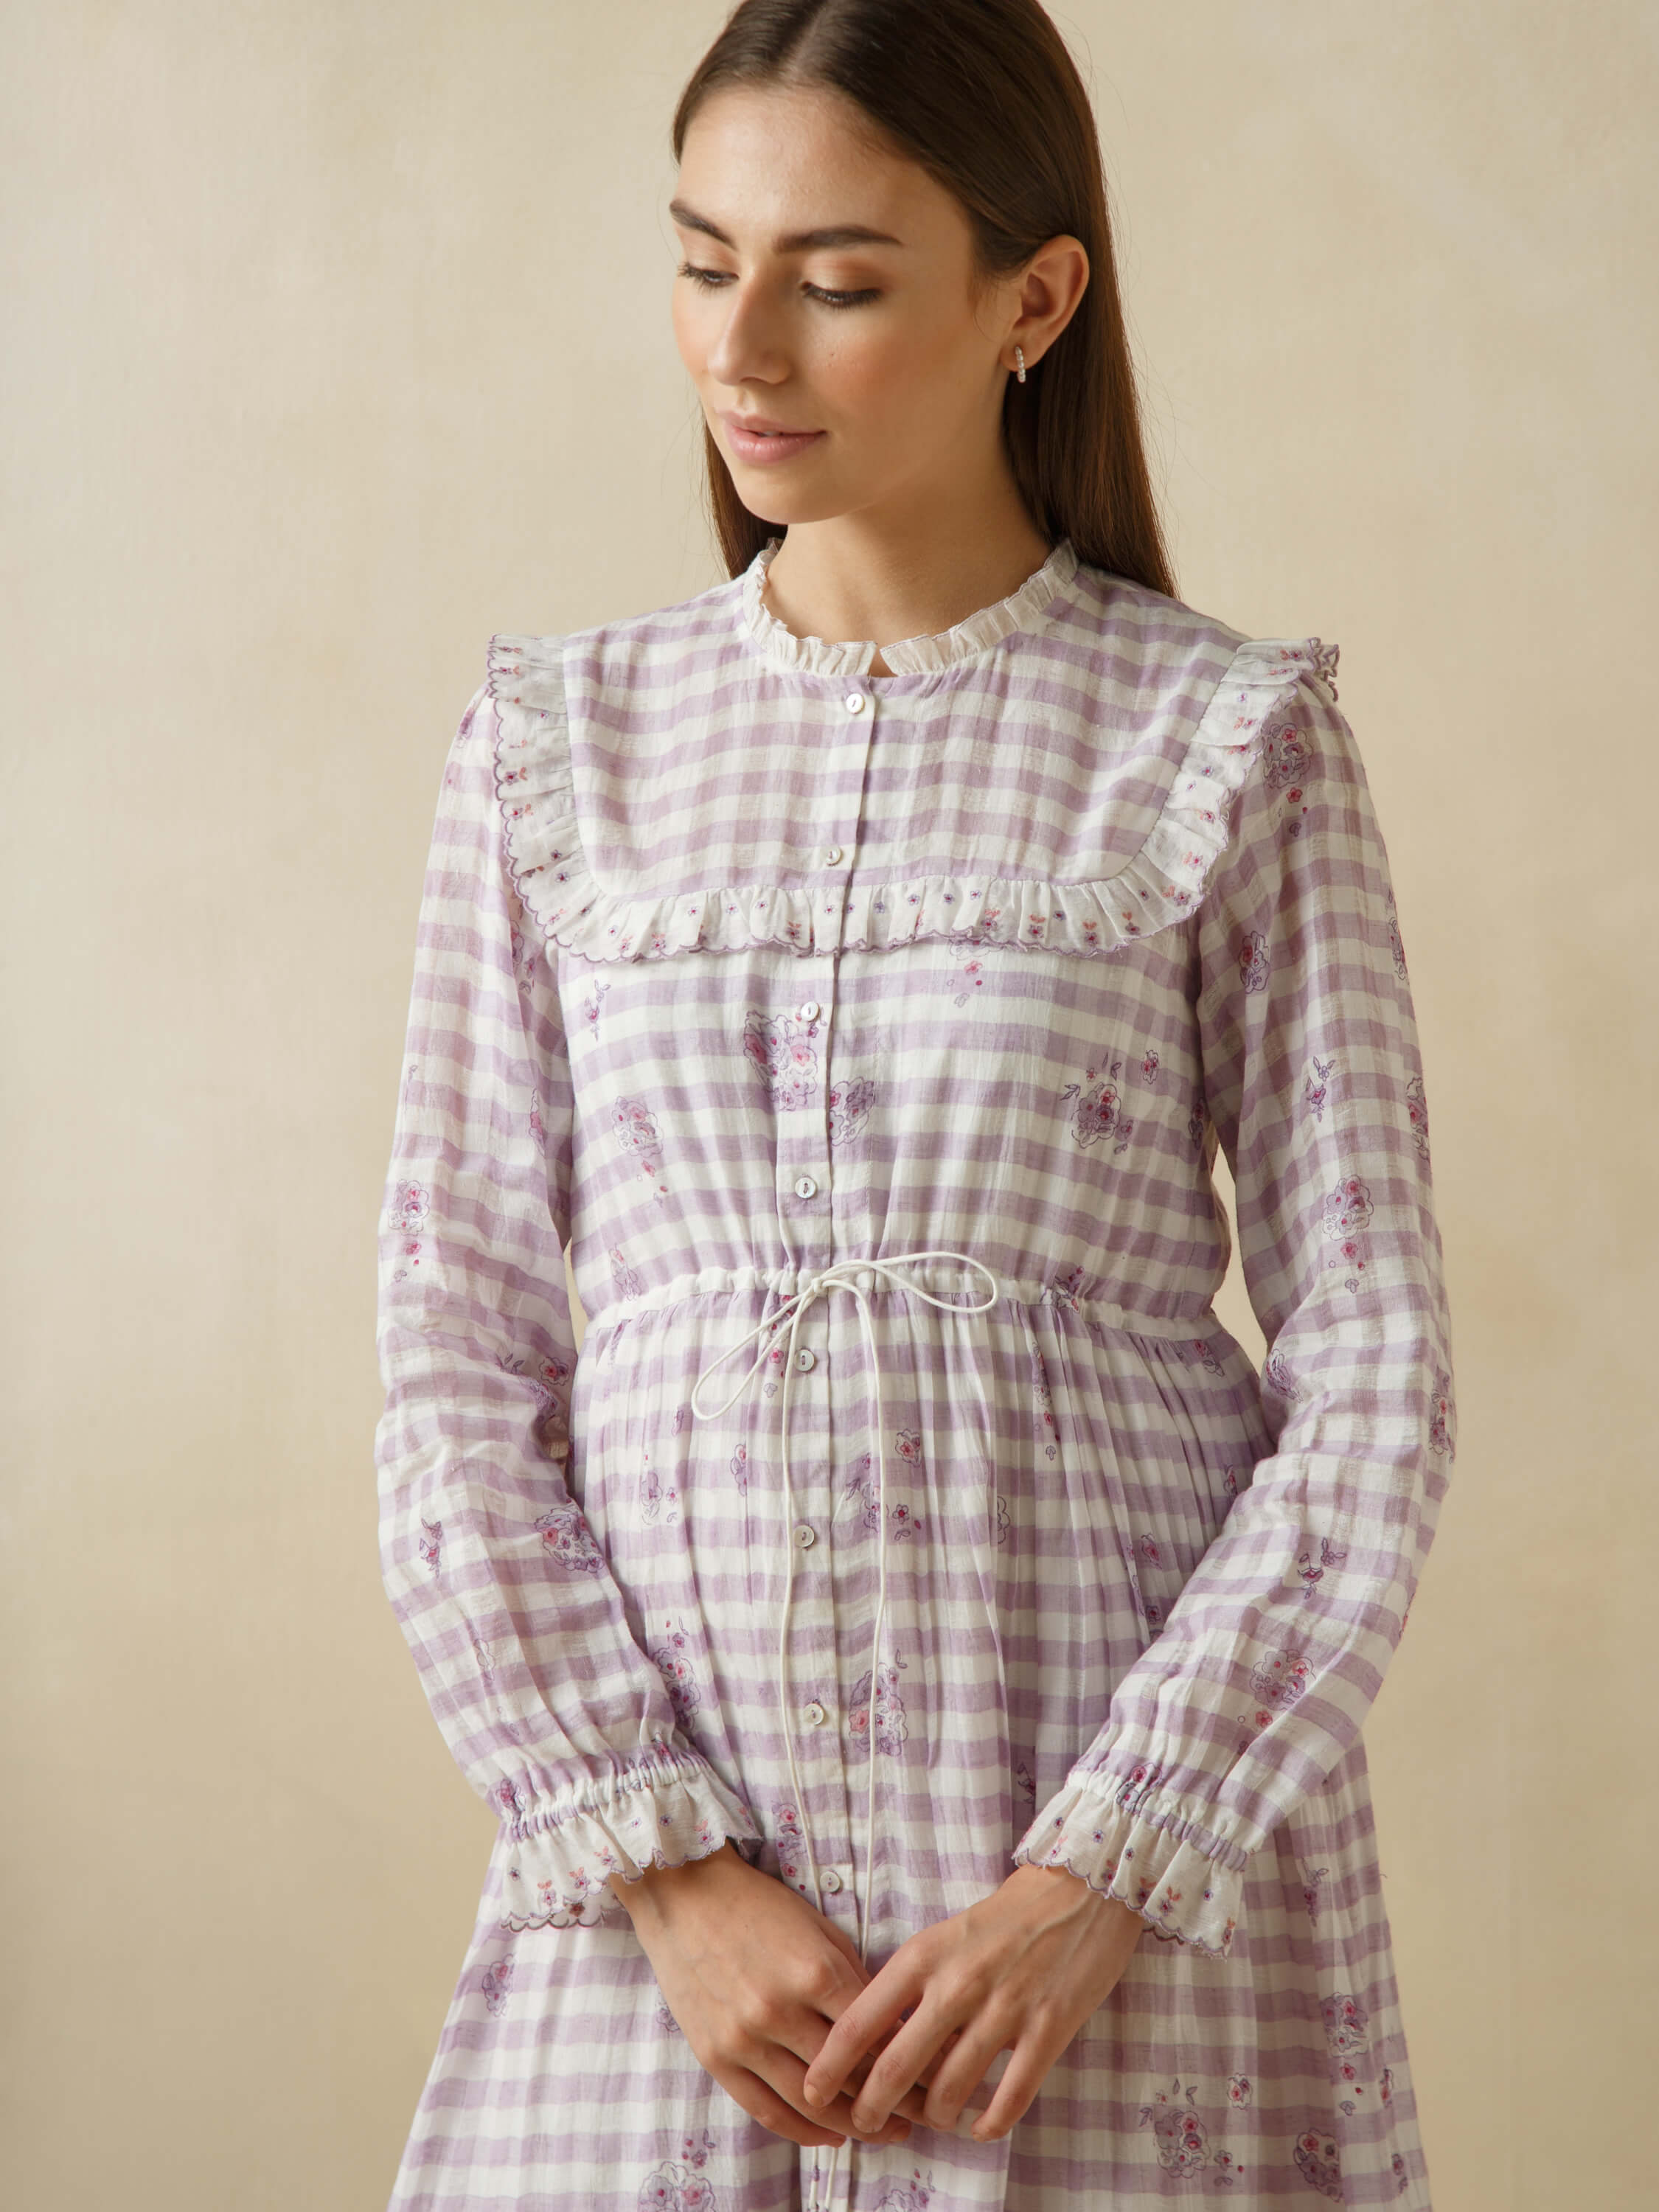 Woman in a lilac checkered dress with floral design and white frills.